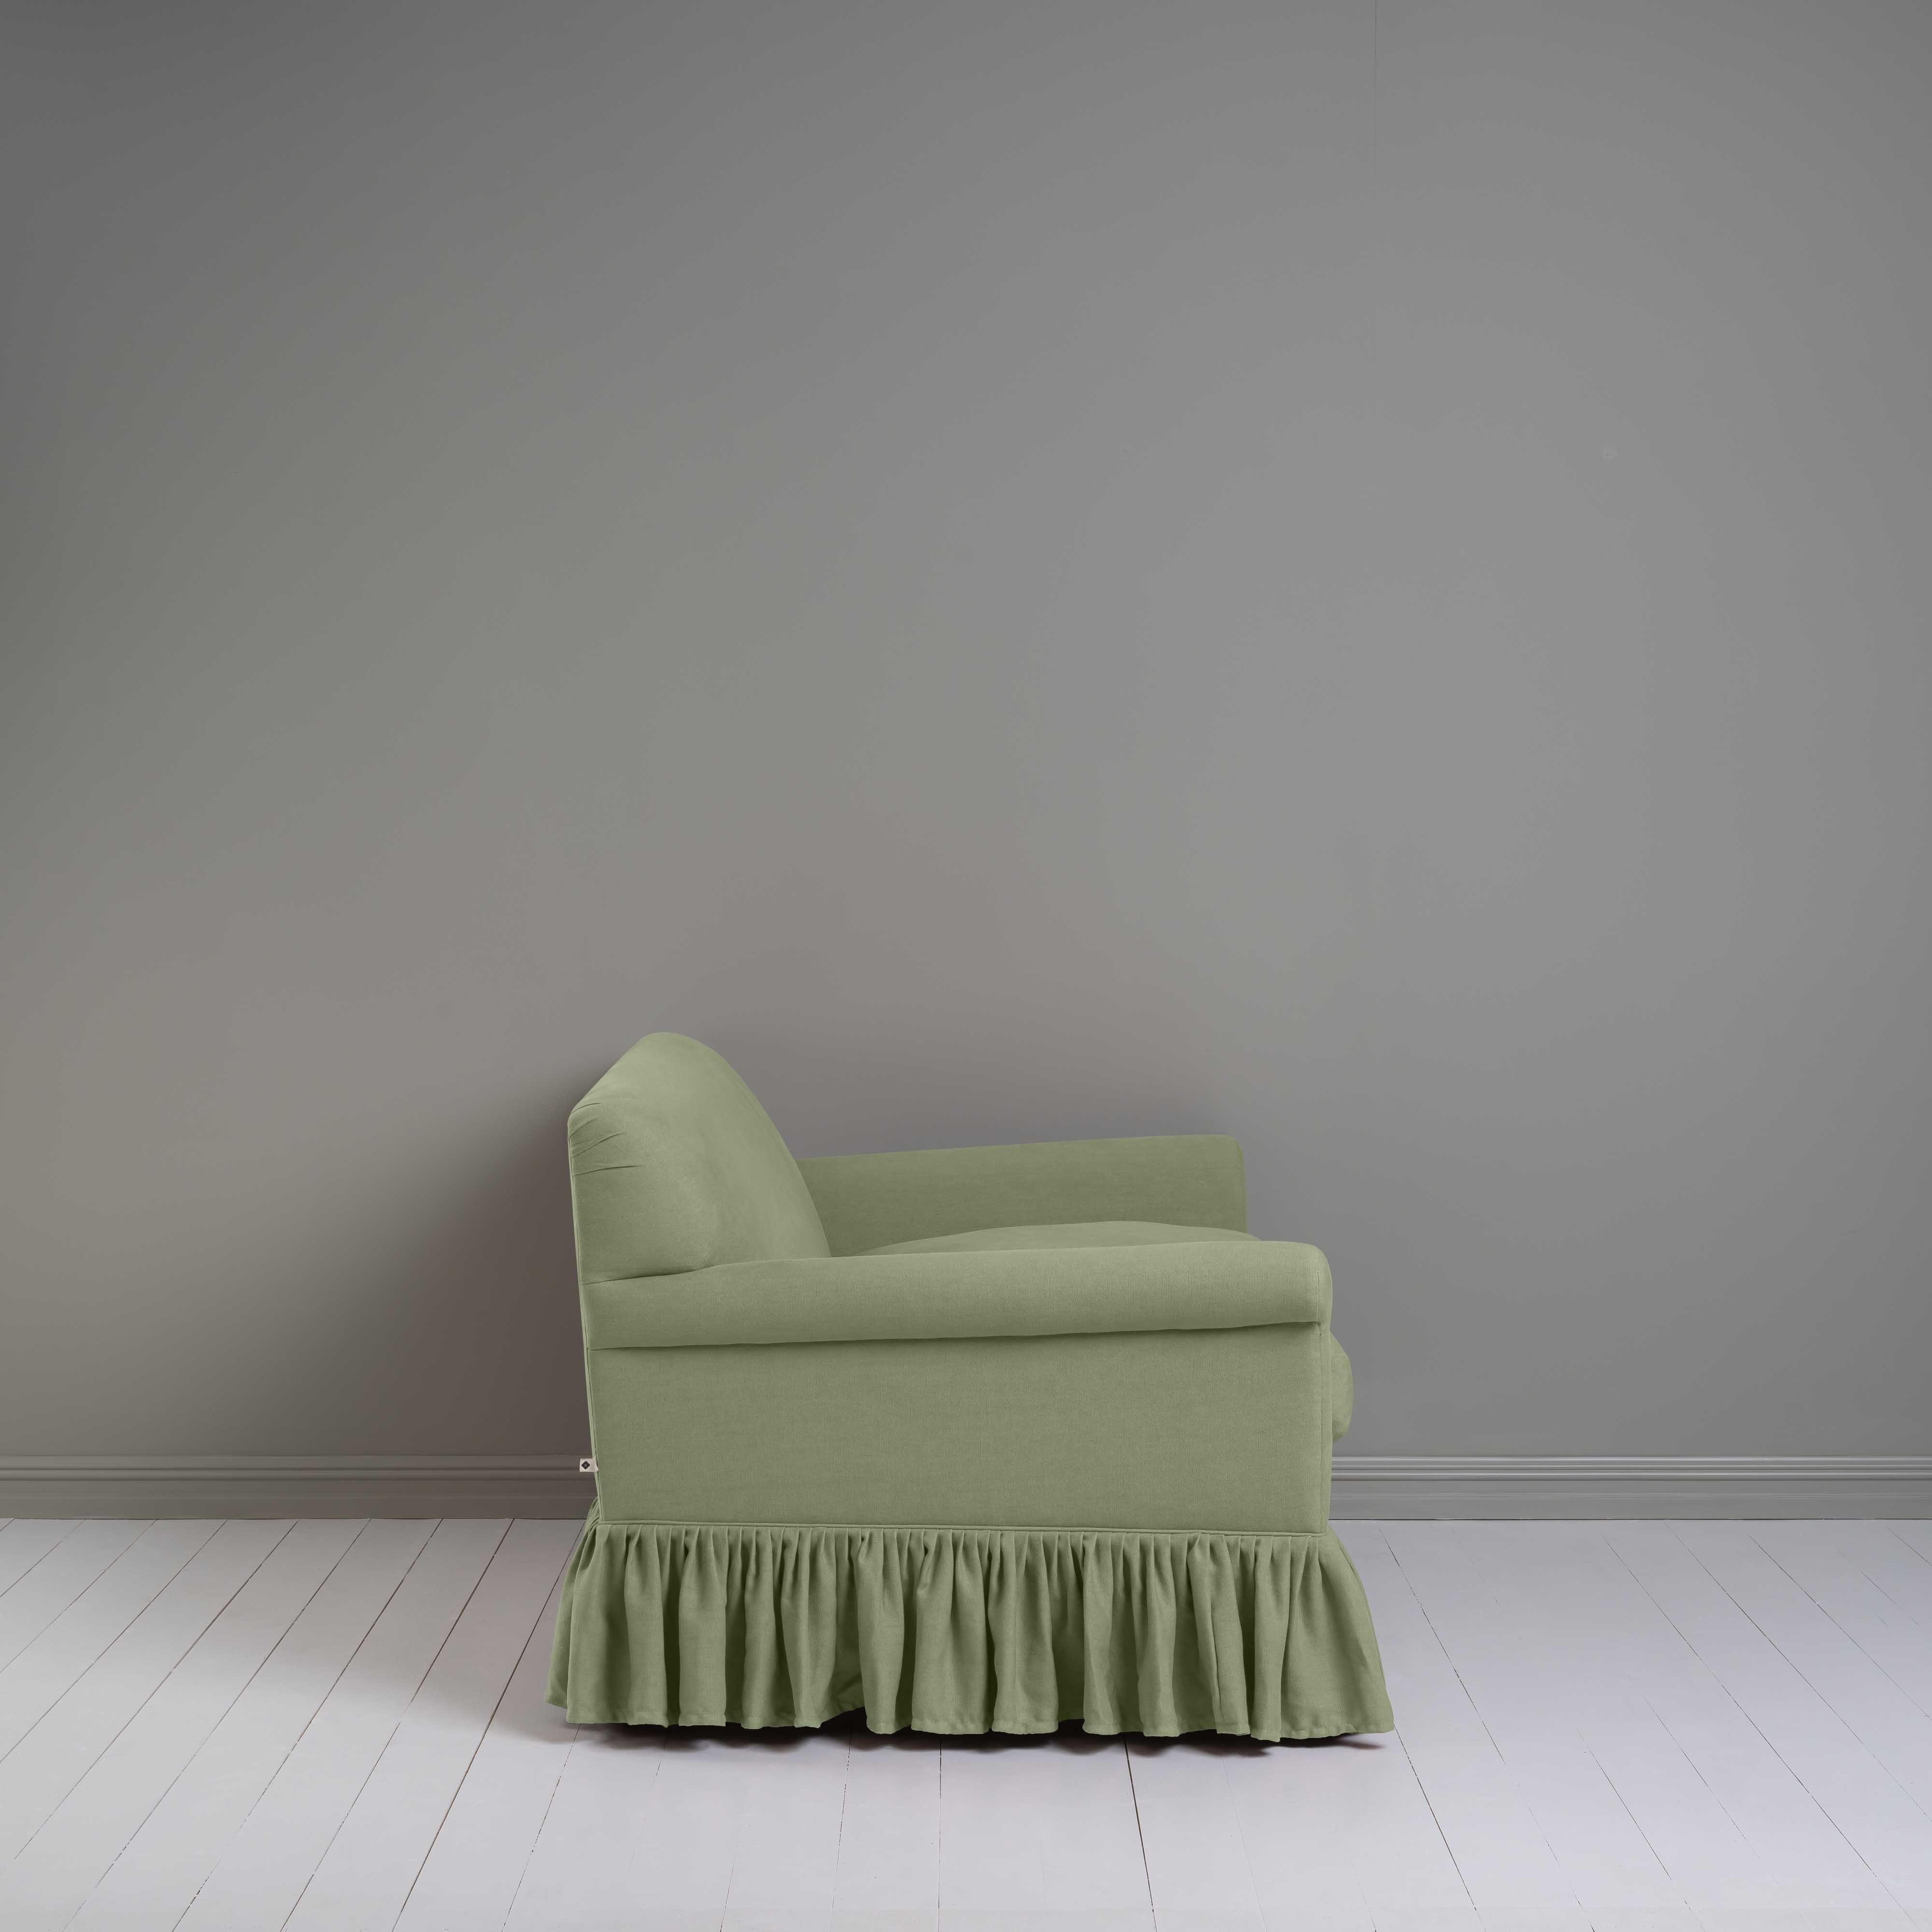  Curtain Call 2 Seater Sofa in Laidback Linen Moss 